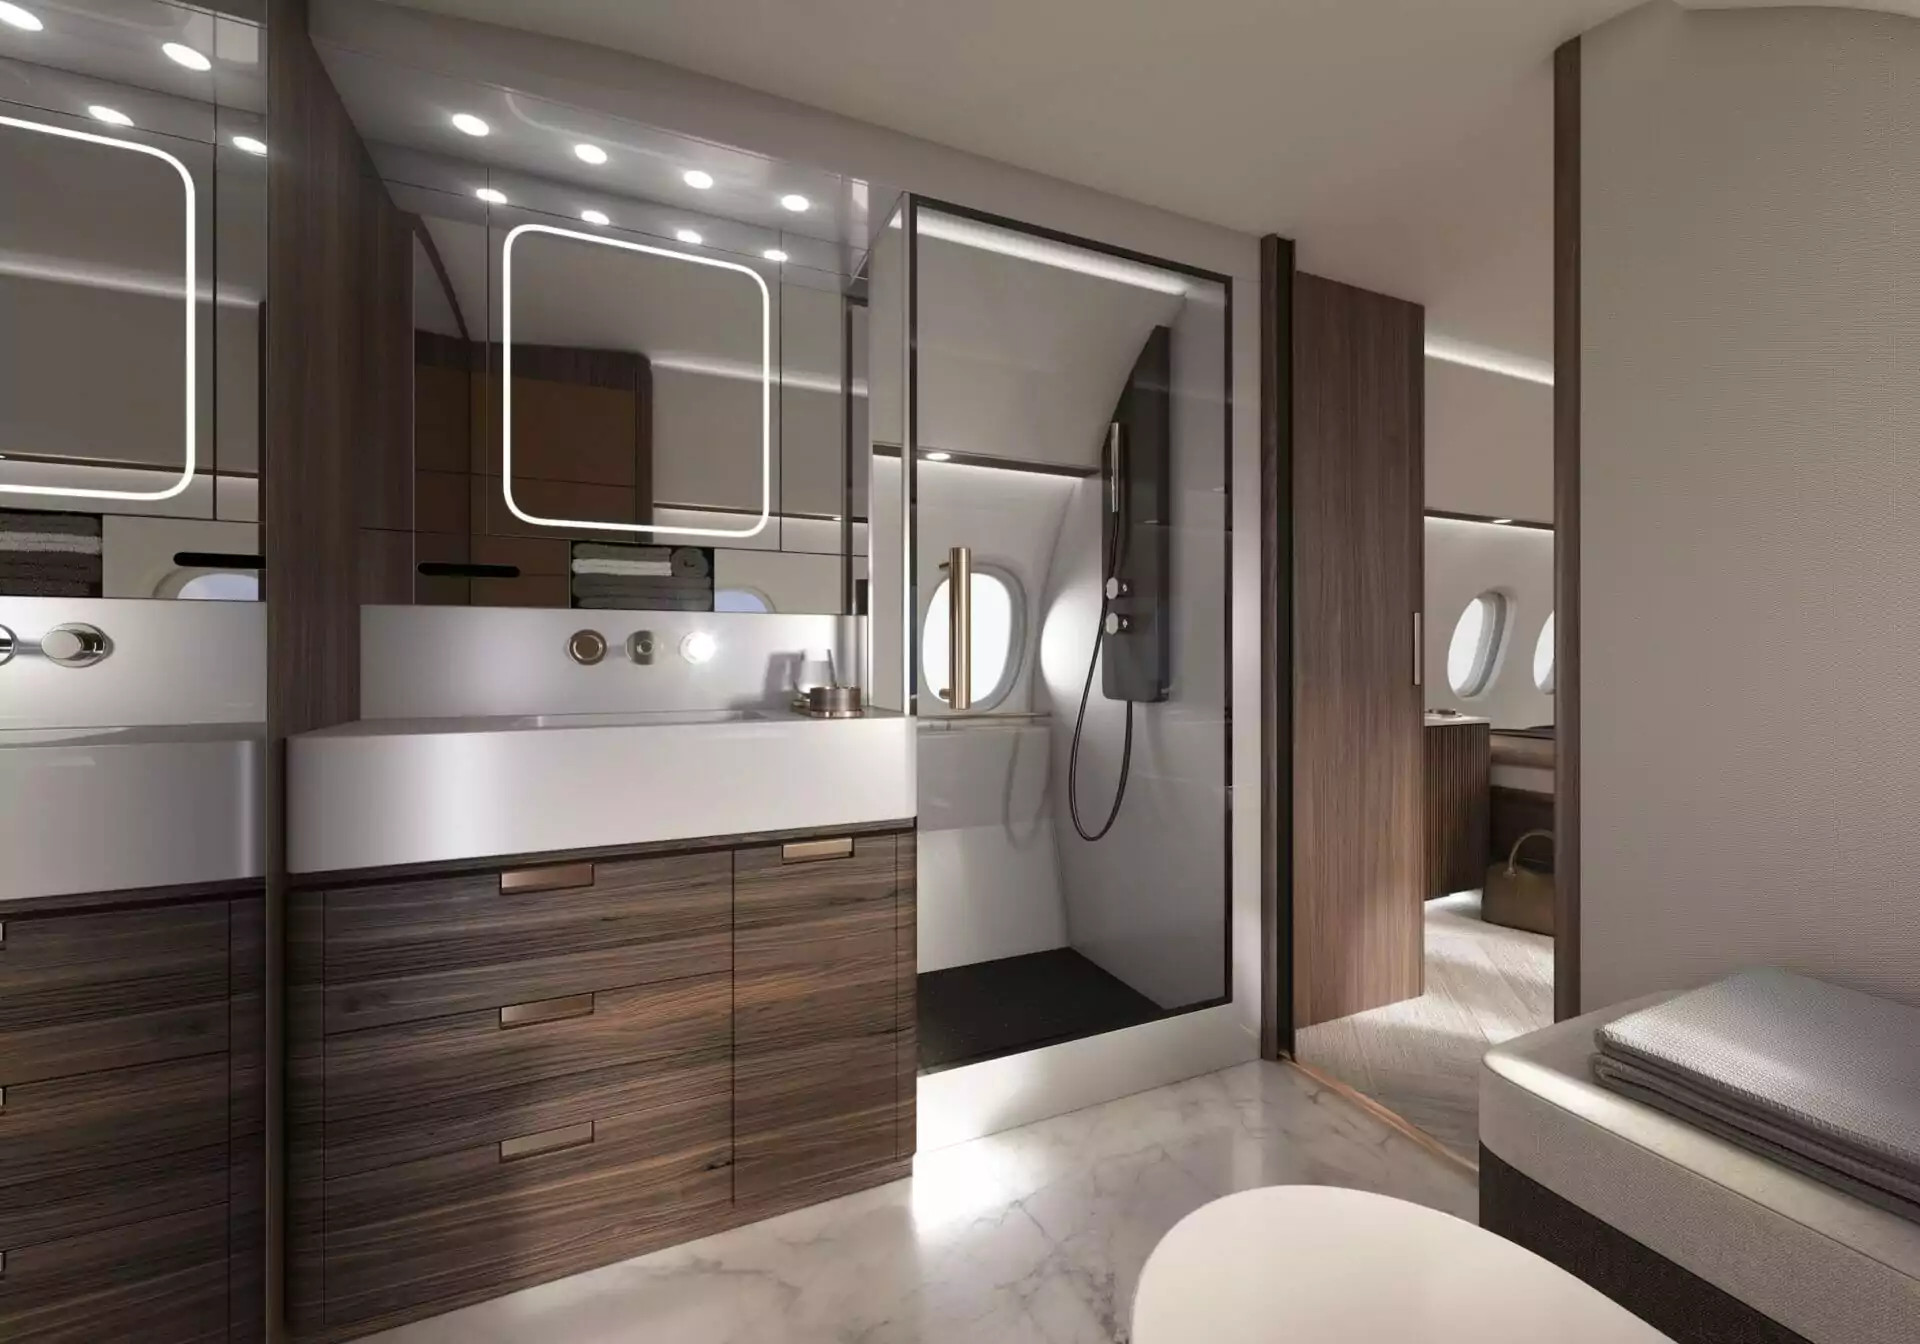 What You Need to Know About Private Jet Bathrooms